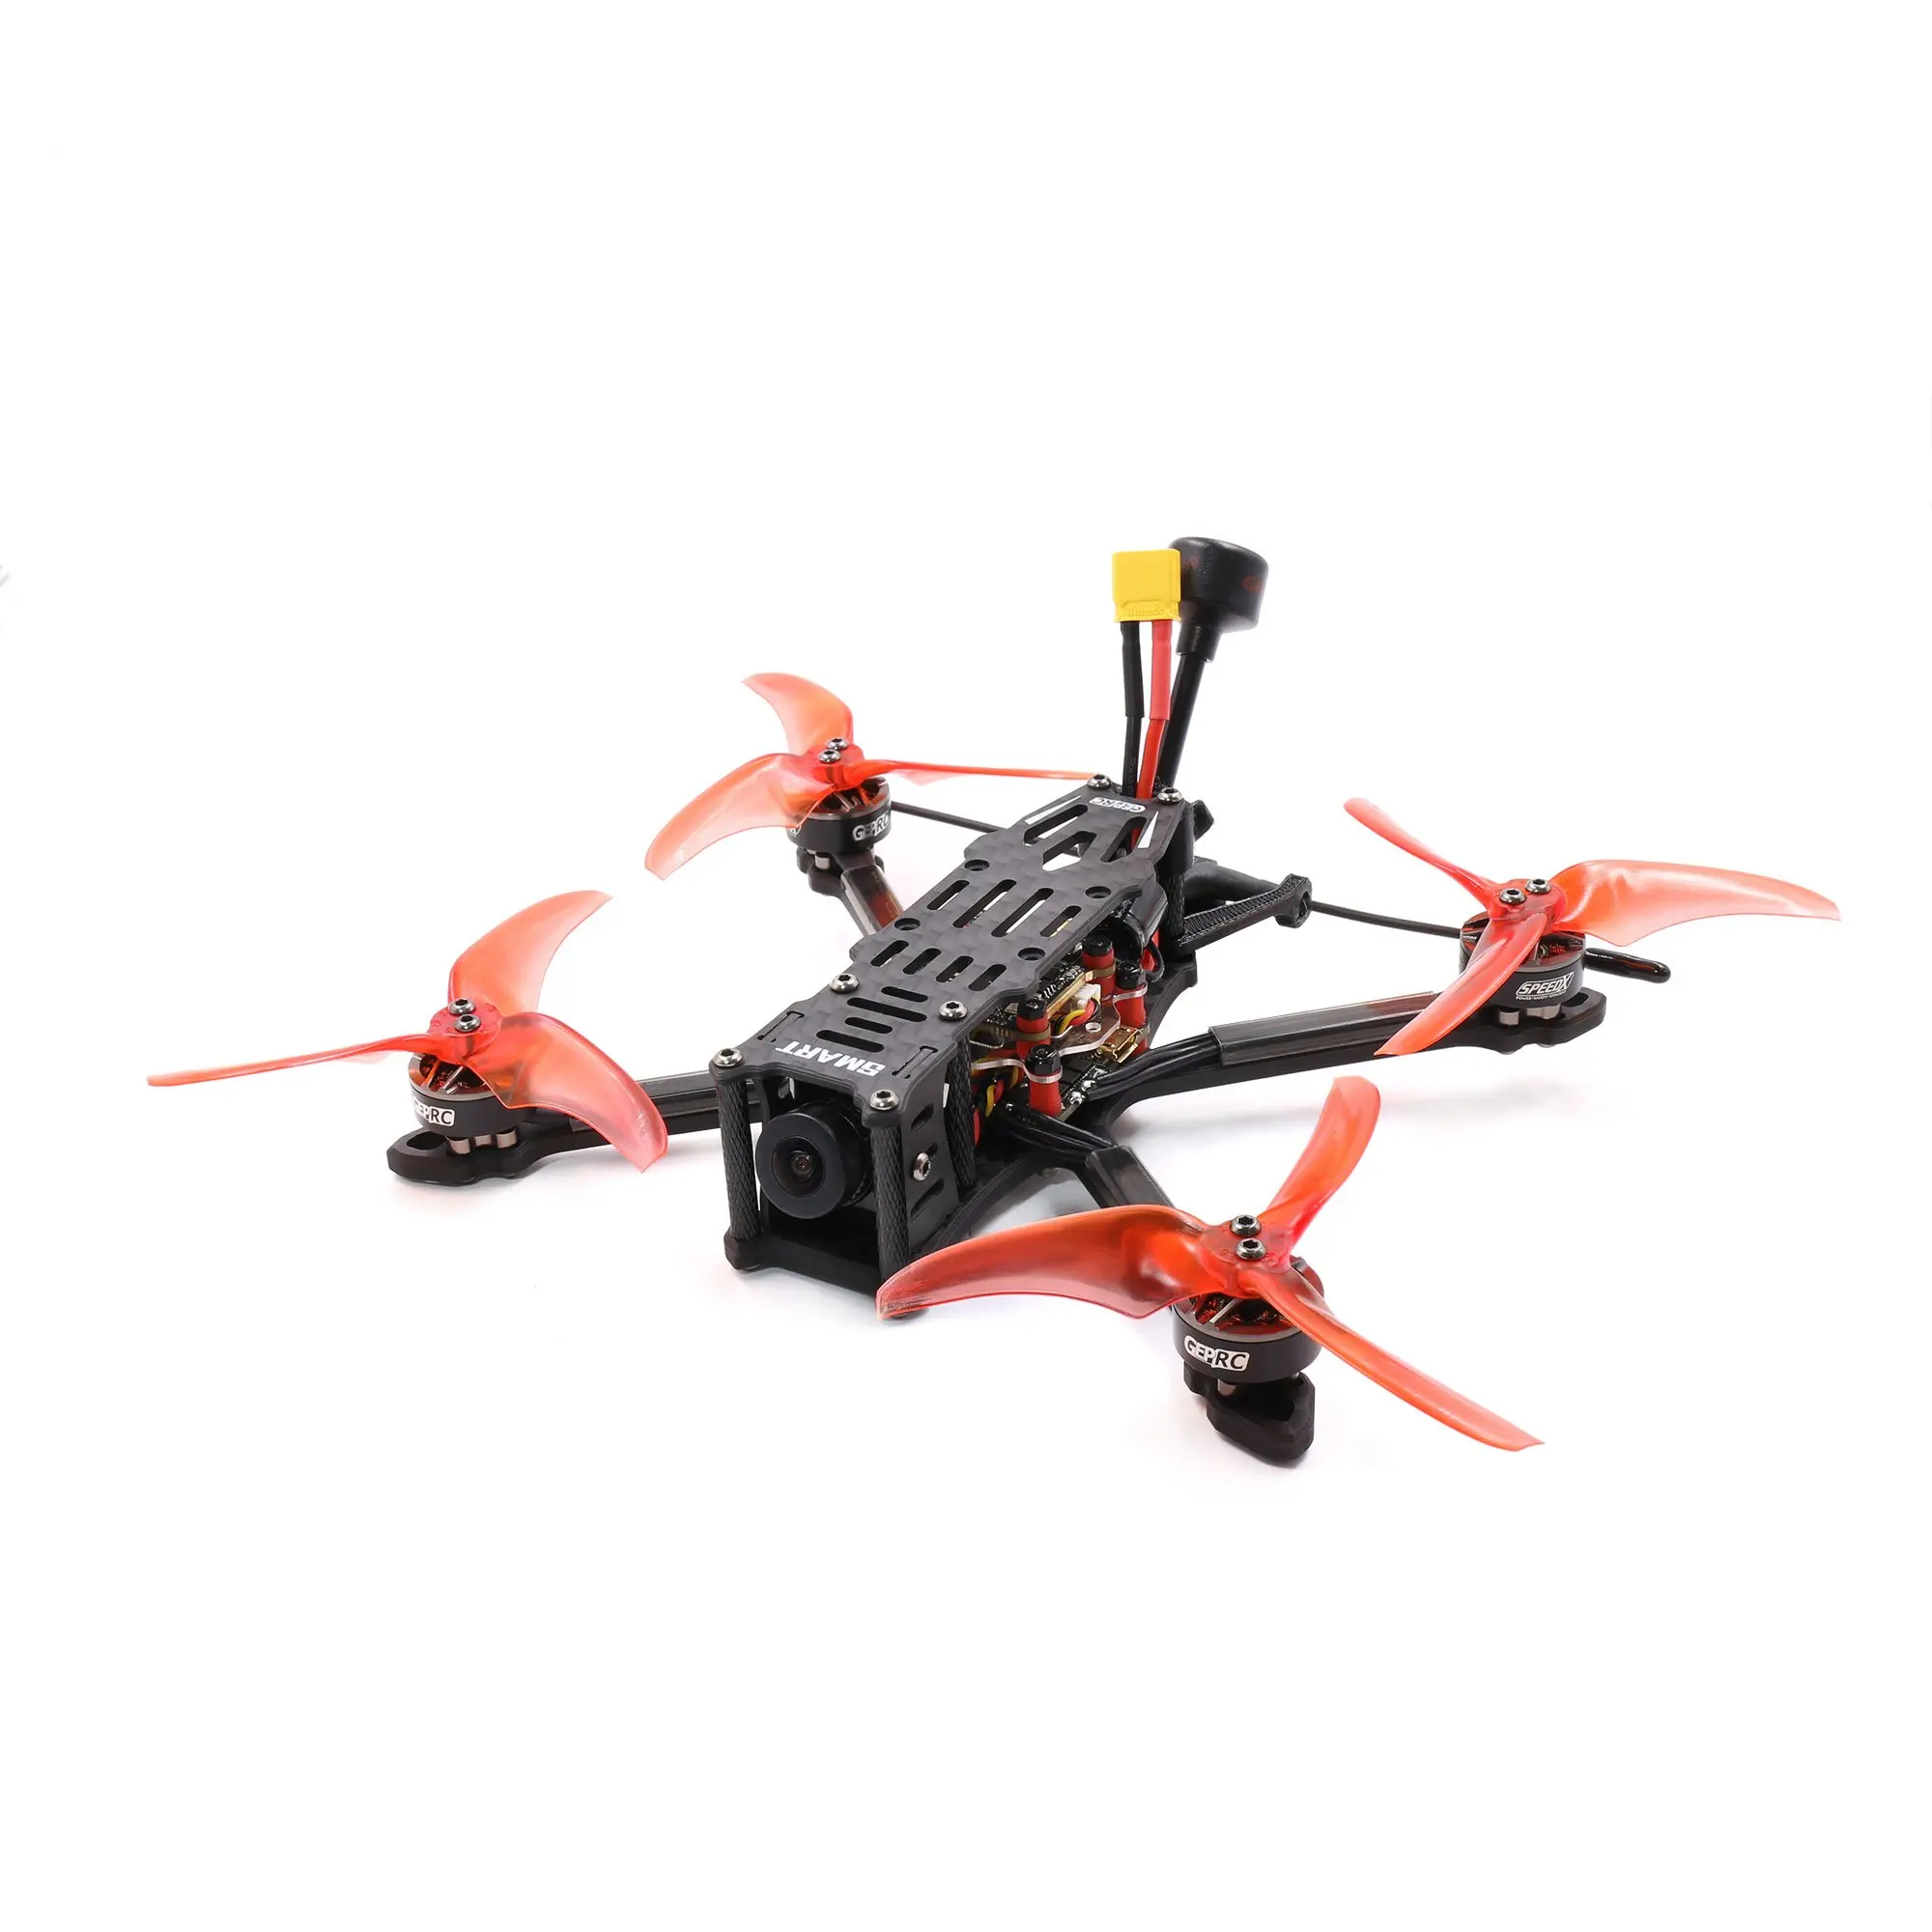 GEPRC SMART35 Analog GEP-F411-35A AIO 600mW Caddx Ratel V2 GR1404 3850KV 4S 155mm 3.5inch Micro FPV Freestyle Drone